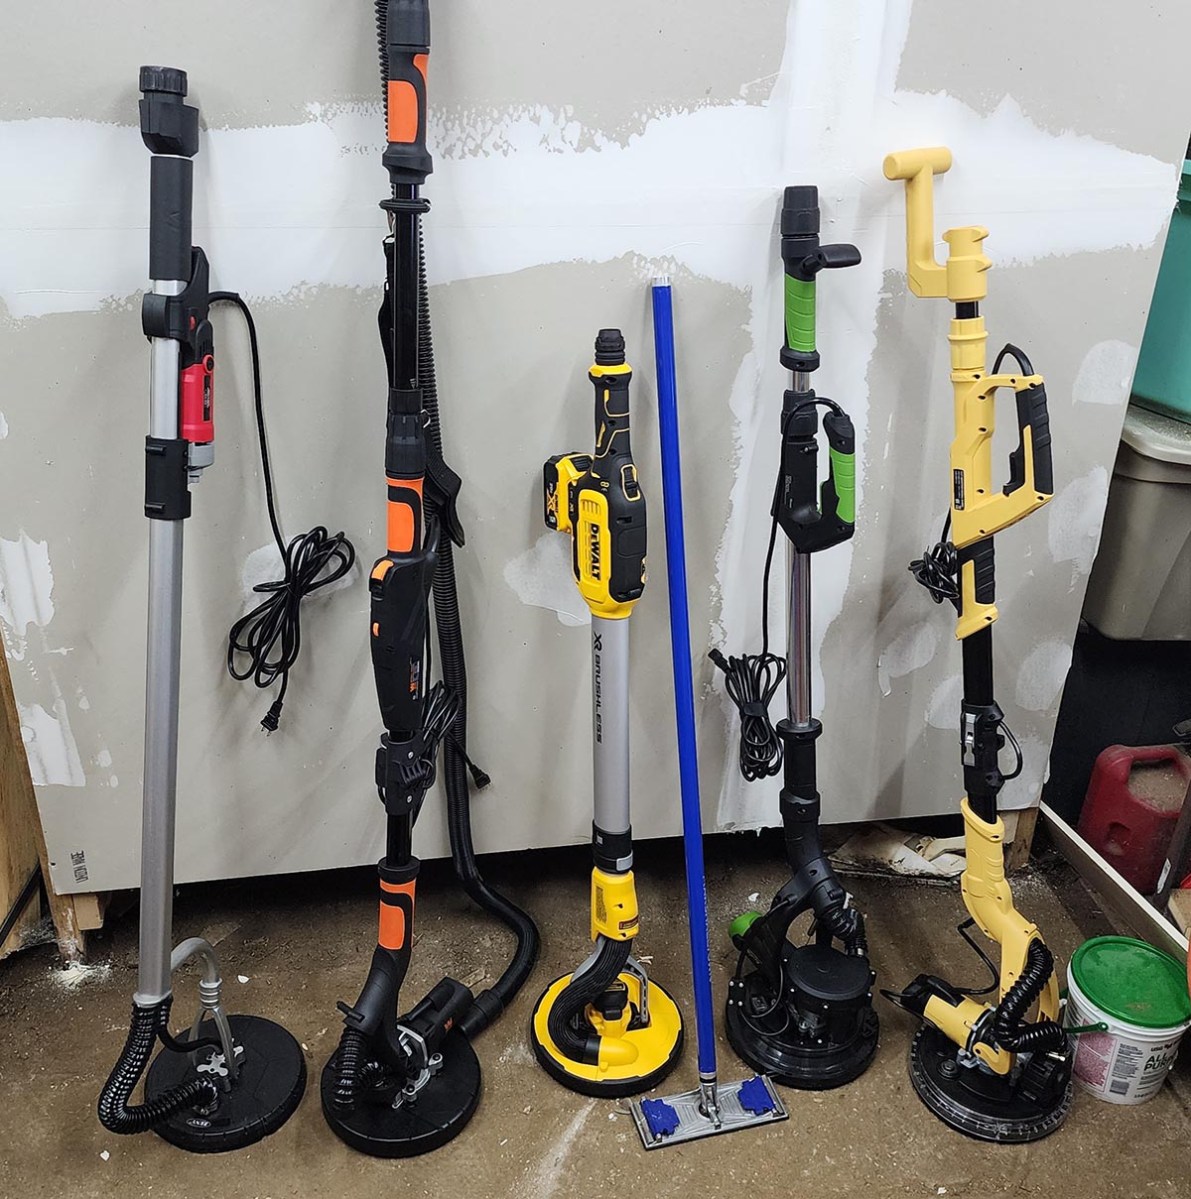 A group of the best drywall sander options together in front of a large section of drywall